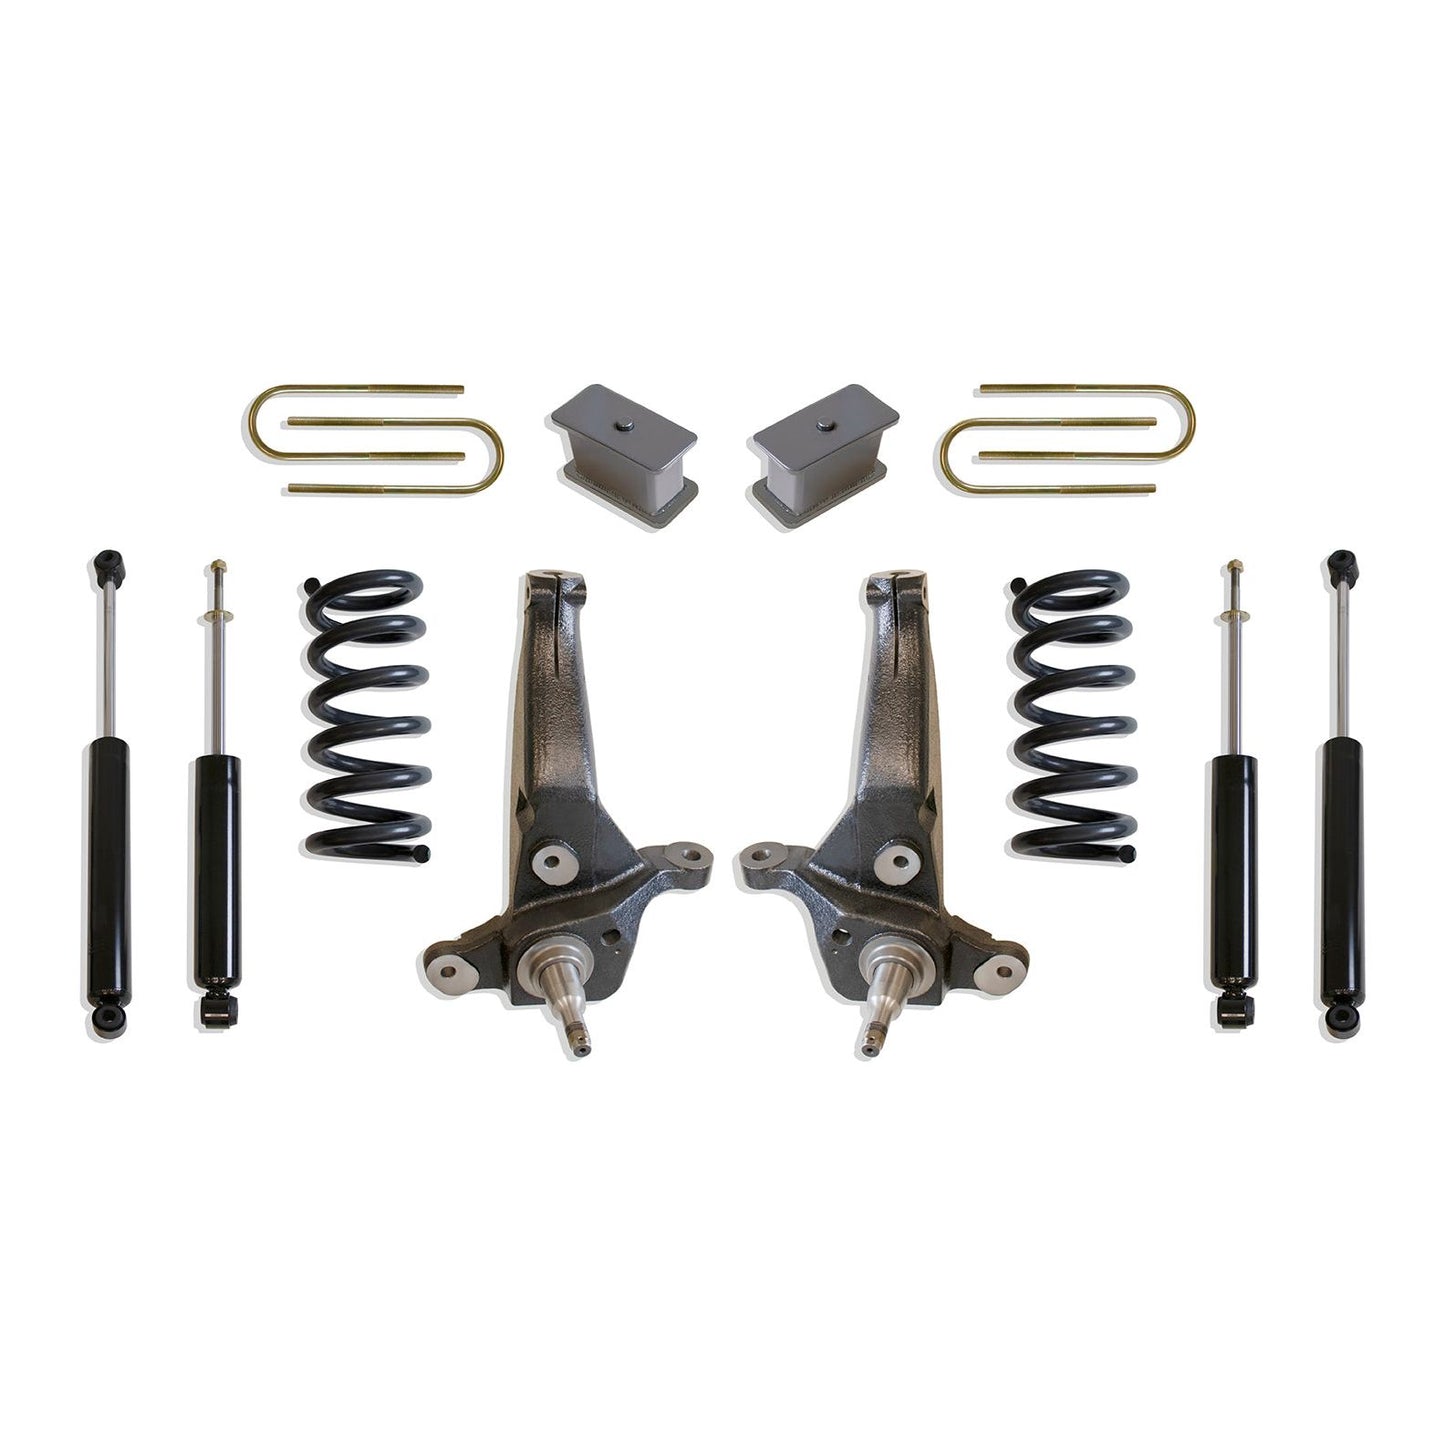 MaxTrac K883063B 6/3 Lift Kit Fits 2001-2009 Ranger 2wd w/Front Coil Springs (non stabilitrak models)